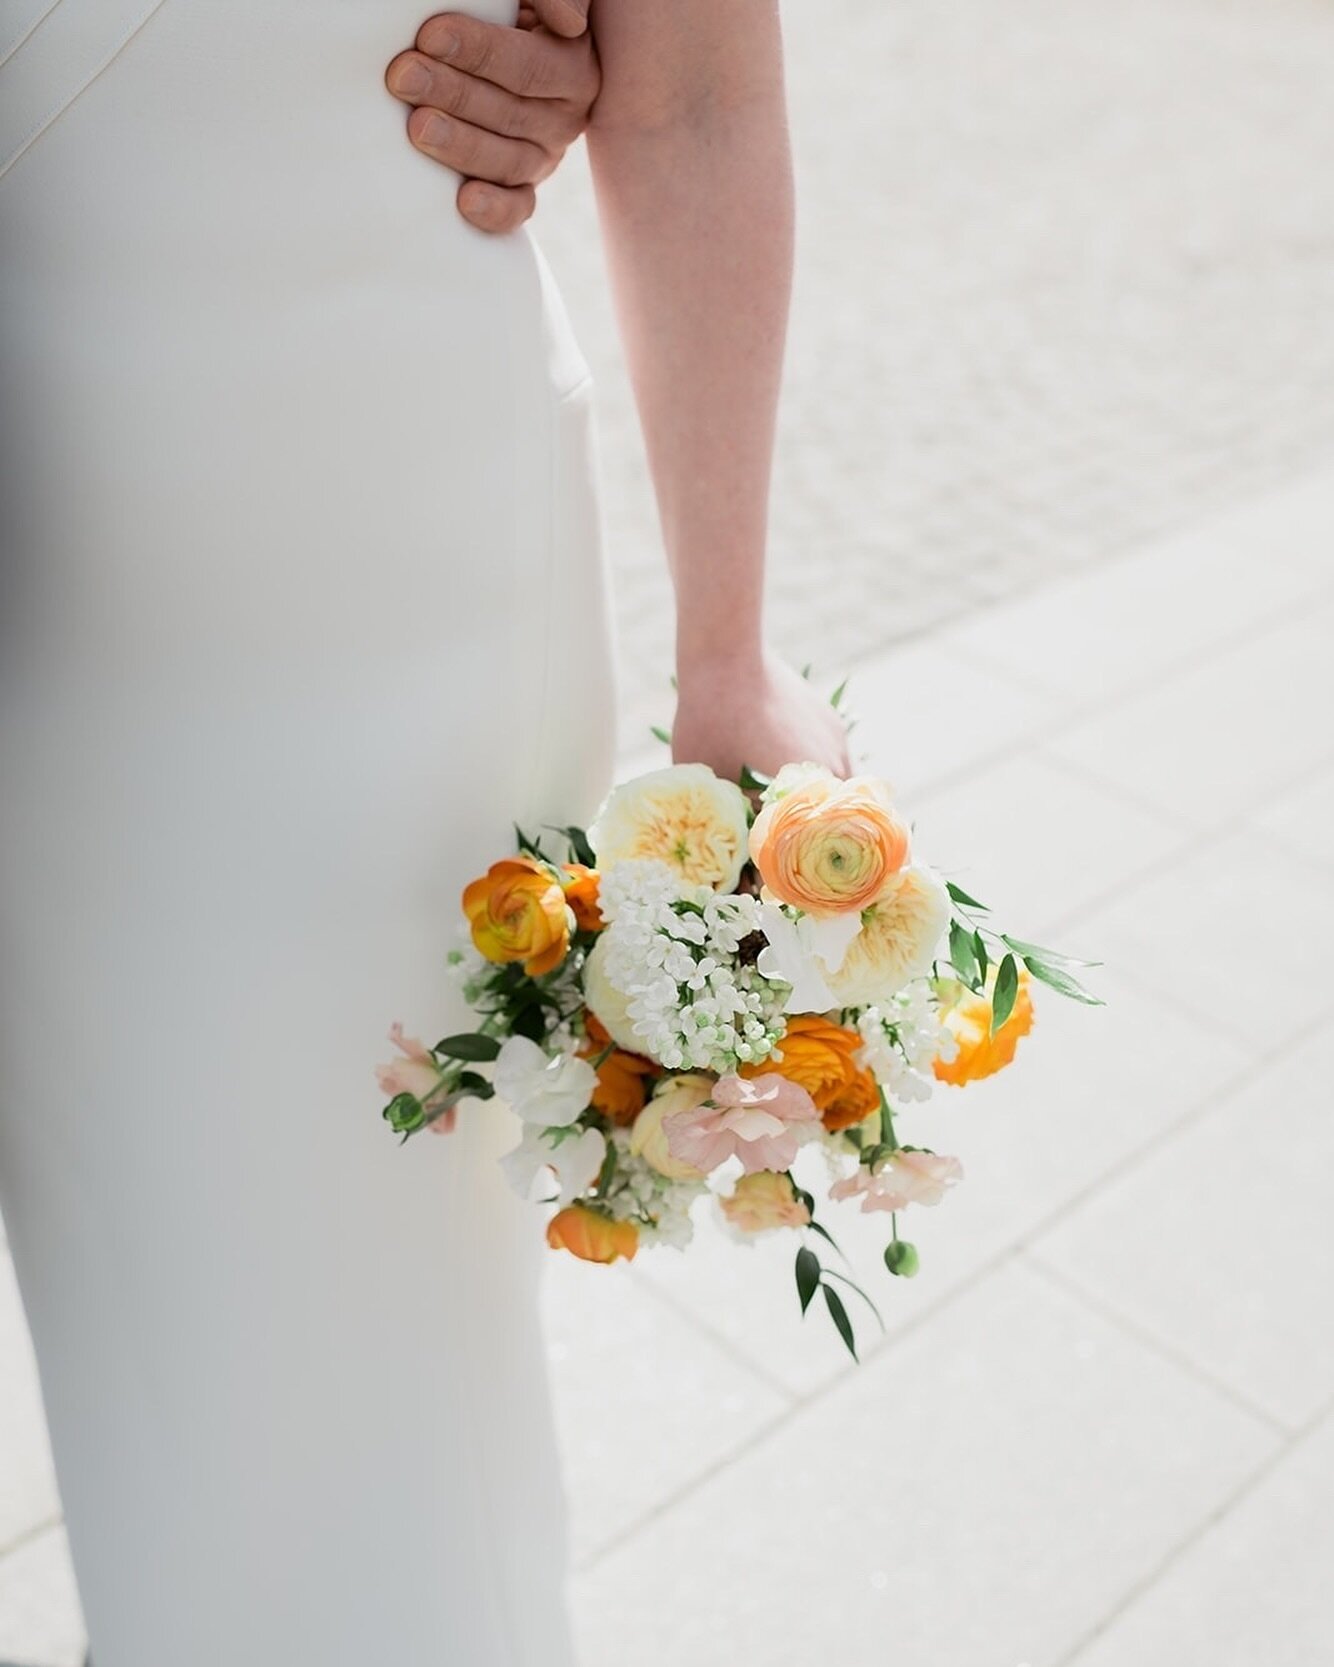 The weather here in Stockholm today reminds me of this beautiful spring wedding from a couple of years ago 🌞 the bridal bouquet was like a little bit of sunshine 🫶🏼 with garden roses, ranunculus, lilacs and more.

Photo @karinlundinstudio